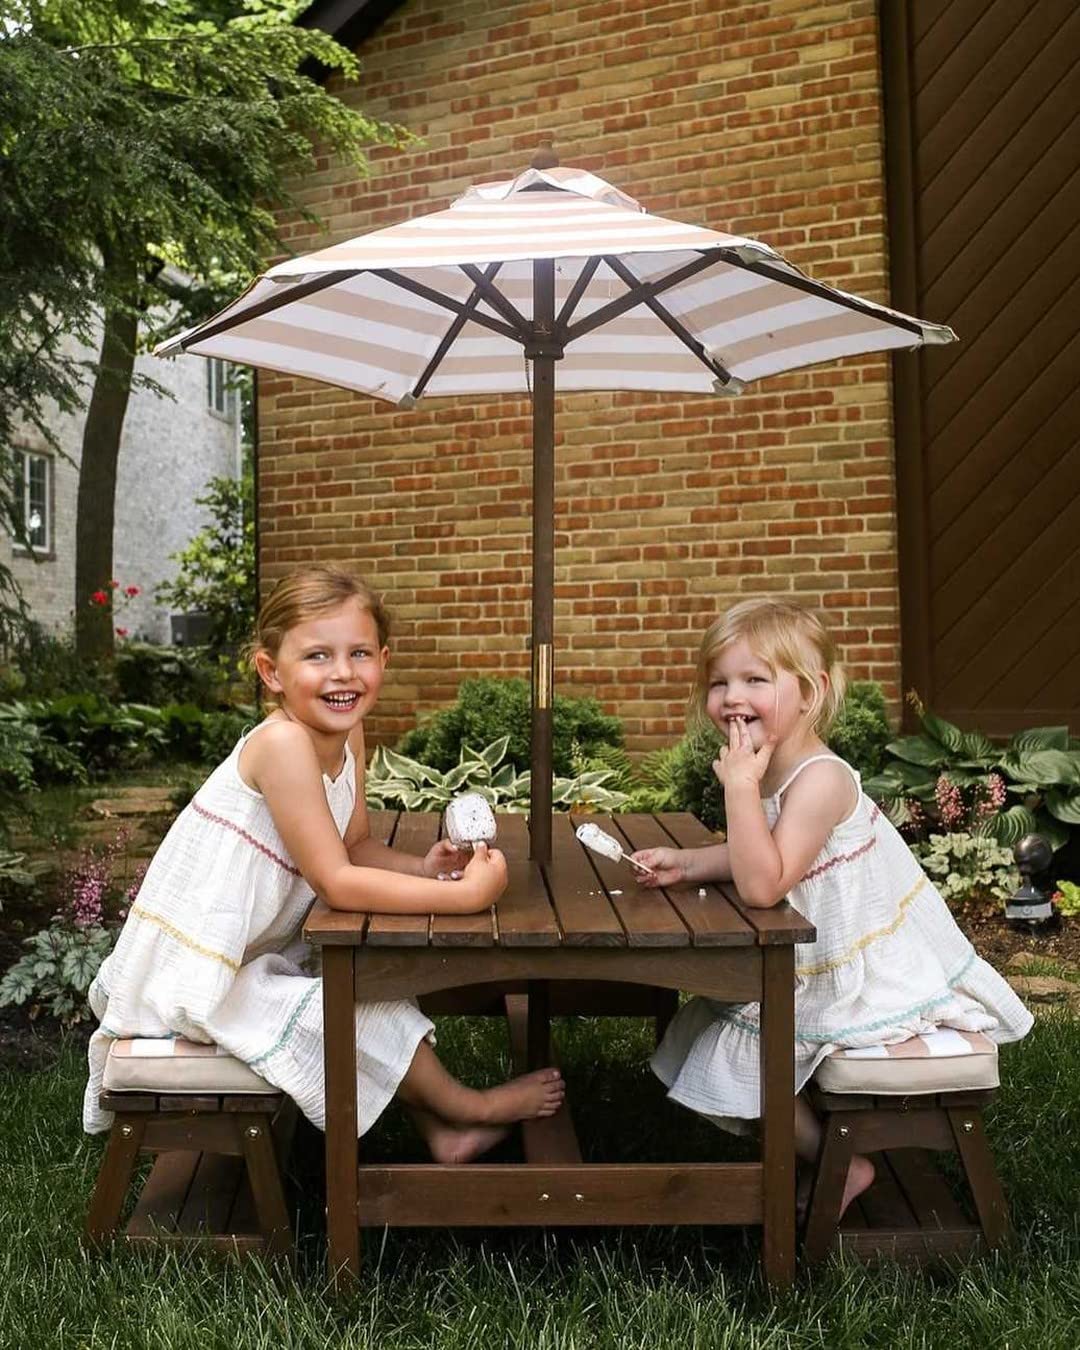 KidKraft Outdoor Wooden Table & Bench Set with Cushions and Umbrella, Kids Backyard Furniture, Espresso with Oatmeal and White Stripe Fabric, Gift for Ages 3-8, 42.25